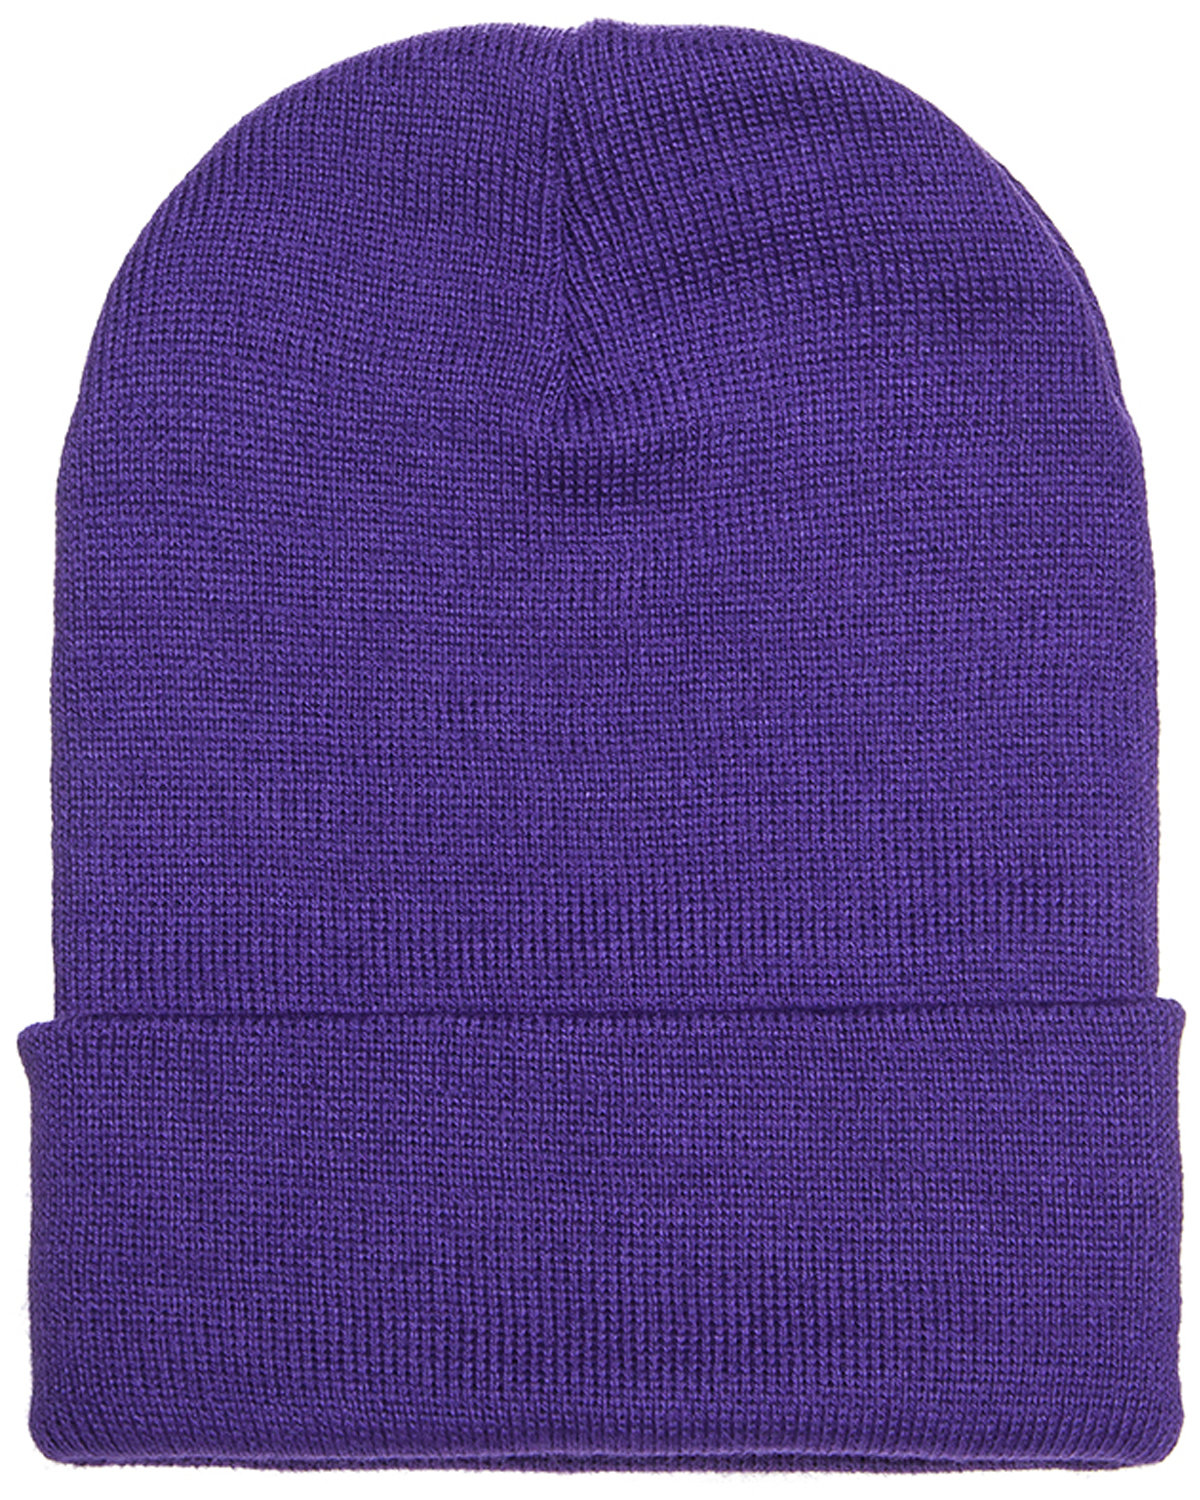 Yupoong Adult Cuffed Knit Beanie | alphabroder | Beanies